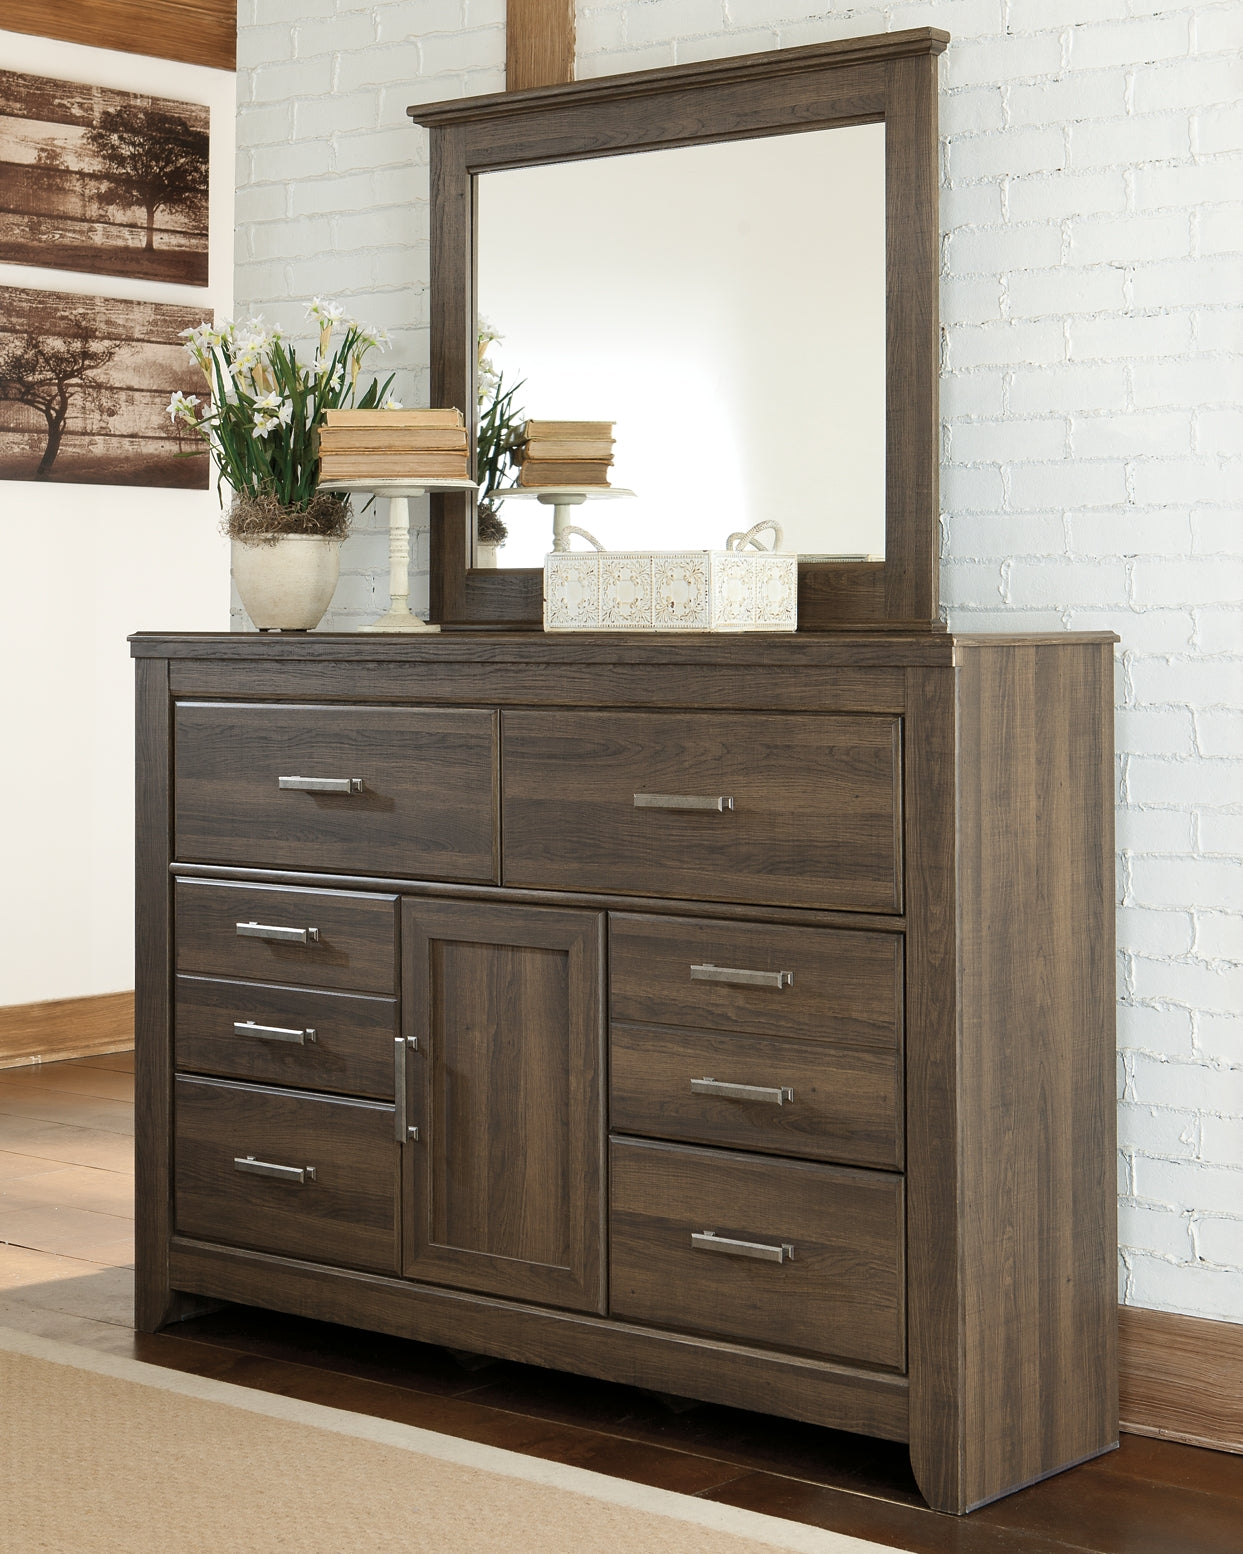 Juararo California King Poster Bed with Mirrored Dresser and 2 Nightstands at Walker Mattress and Furniture Locations in Cedar Park and Belton TX.